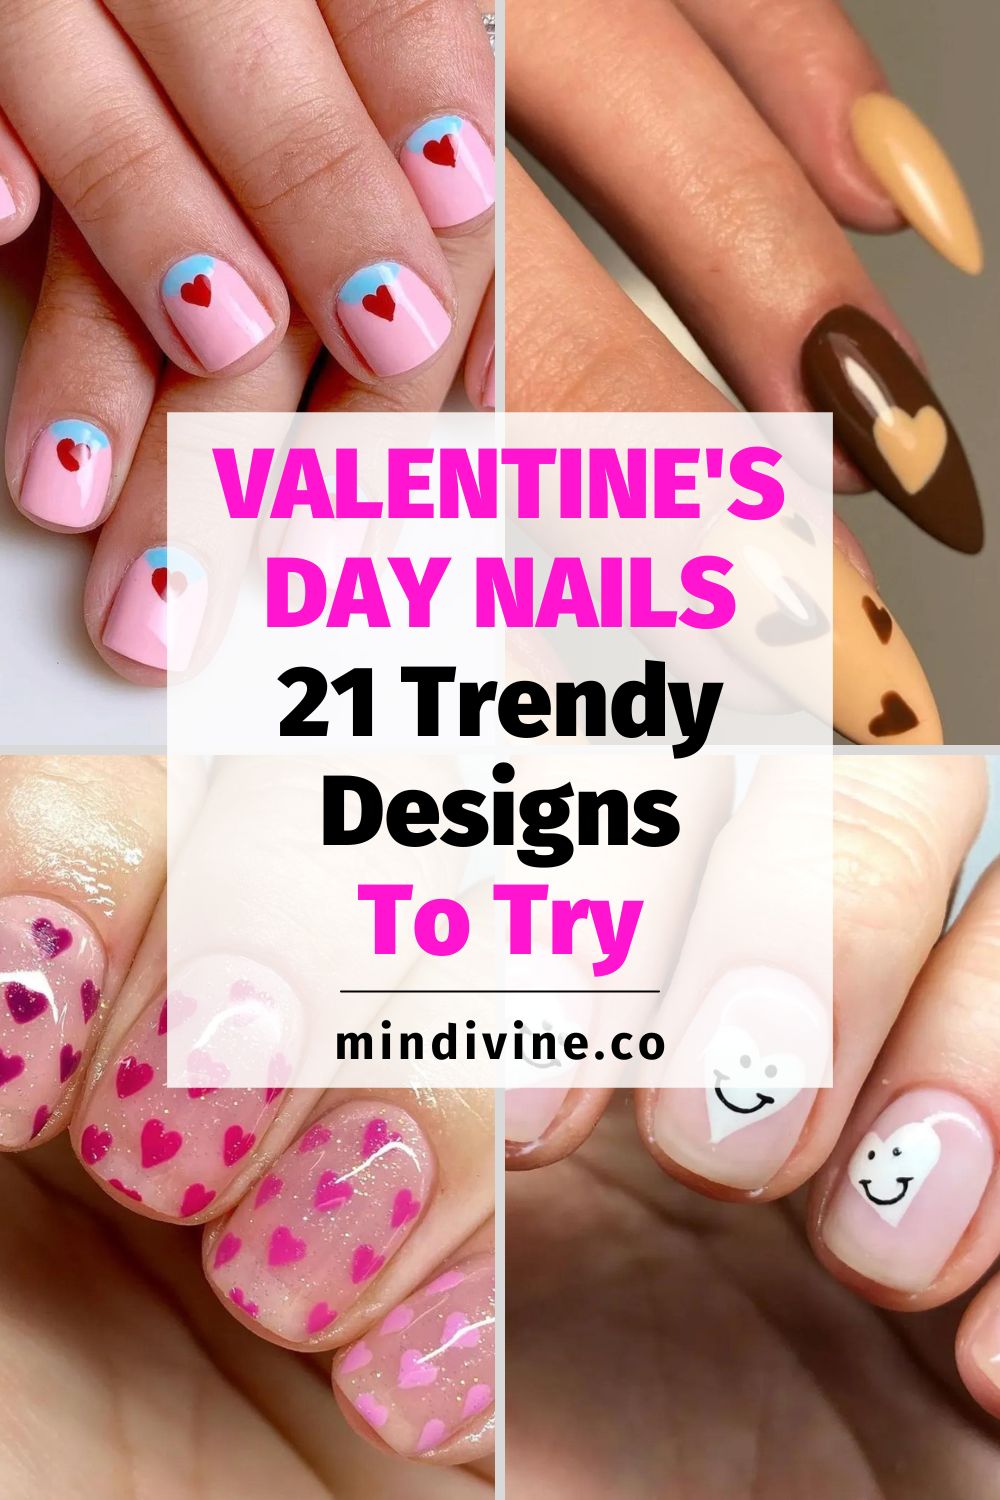 4 designs for Valentine's Day Nails